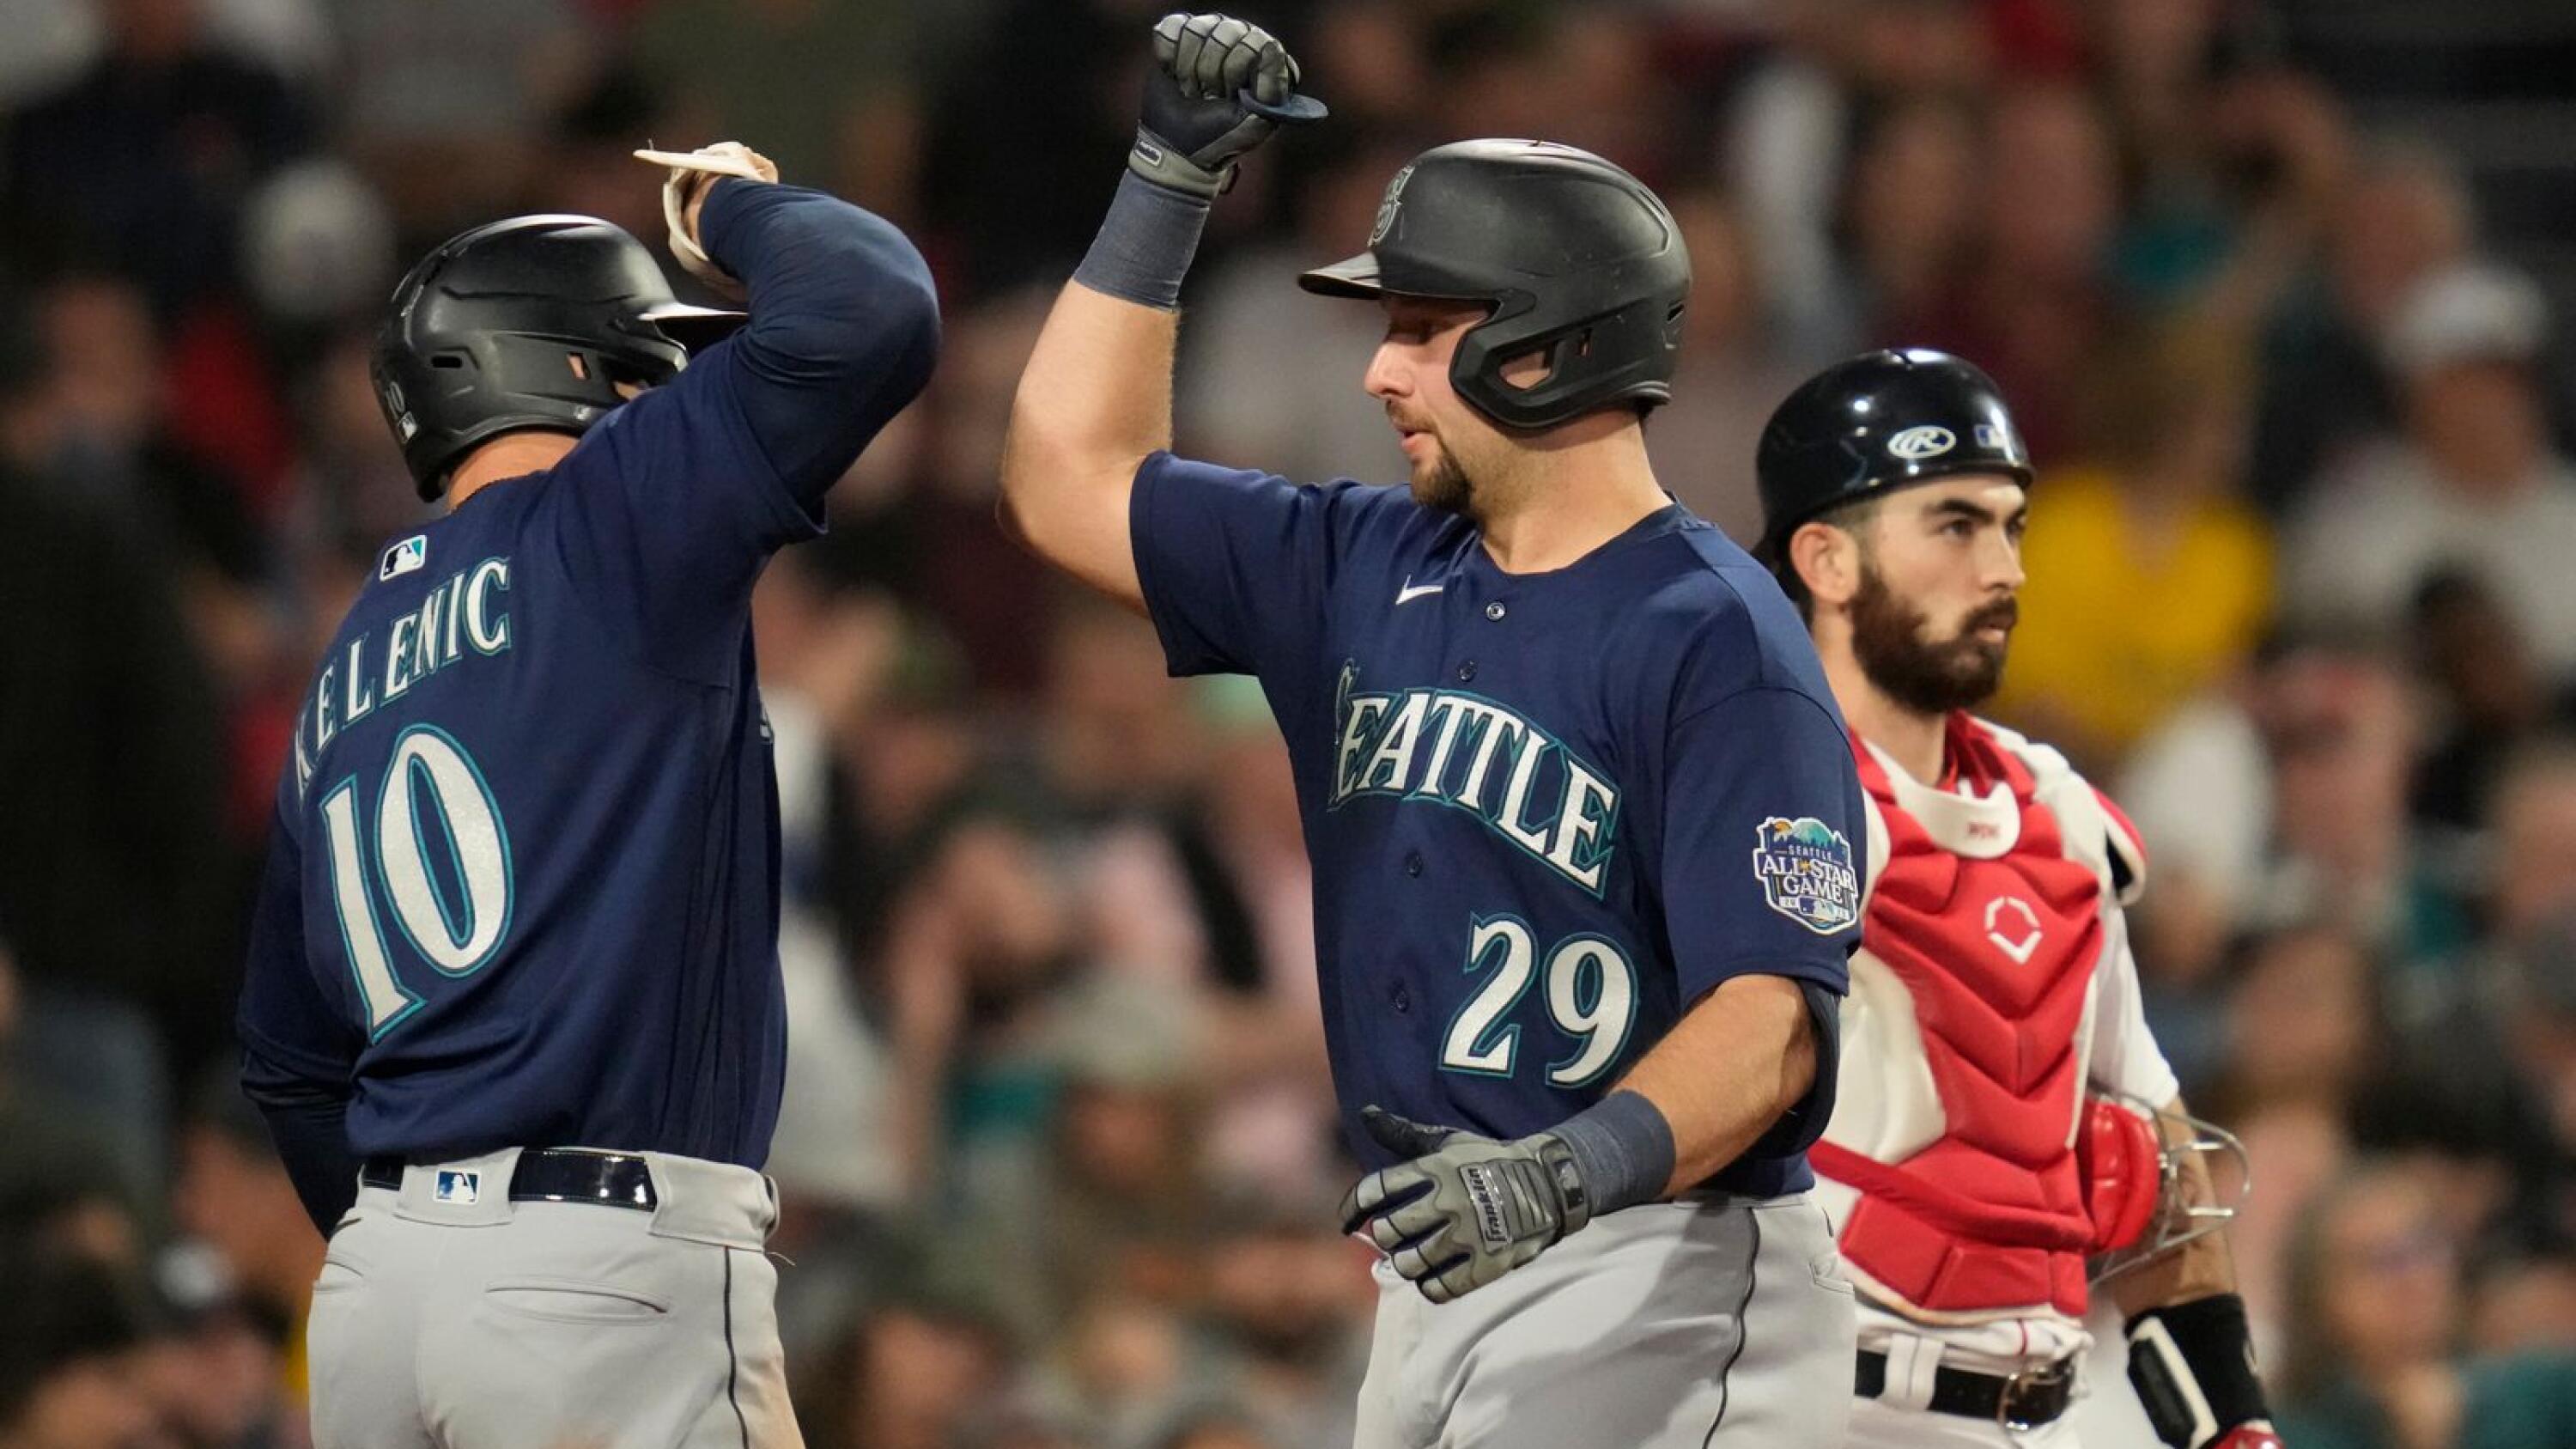 France passed over again for AL All-Star team, M's game postponed